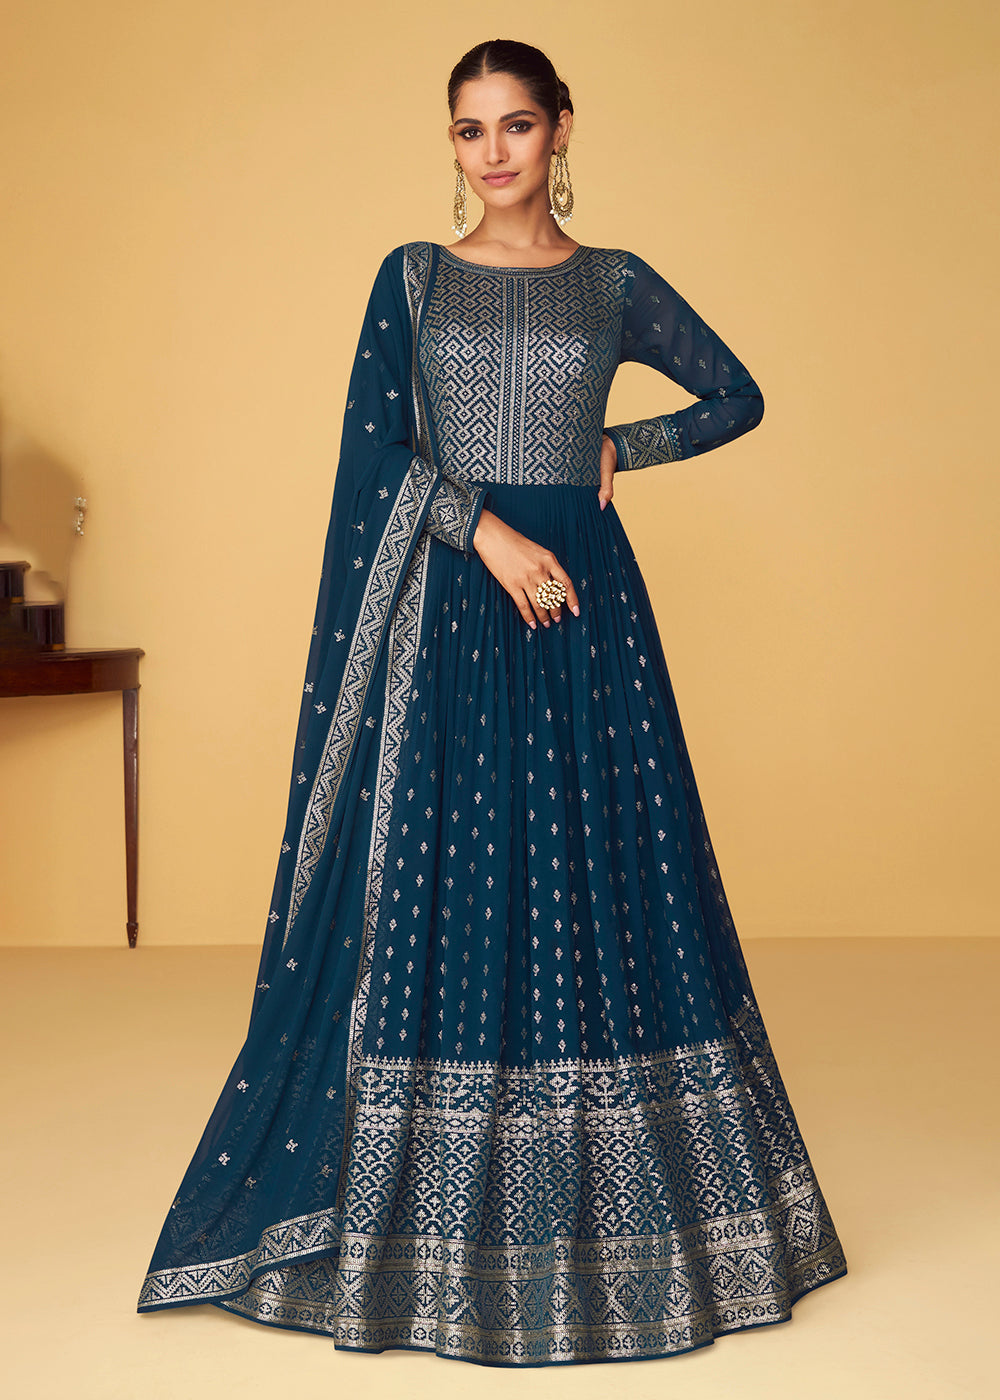 Buy Now Sequins & Thread Real Georgette Blue Indian Anarkali Suit Online in USA, UK, Australia, New Zealand, Canada & Worldwide at Empress Clothing.